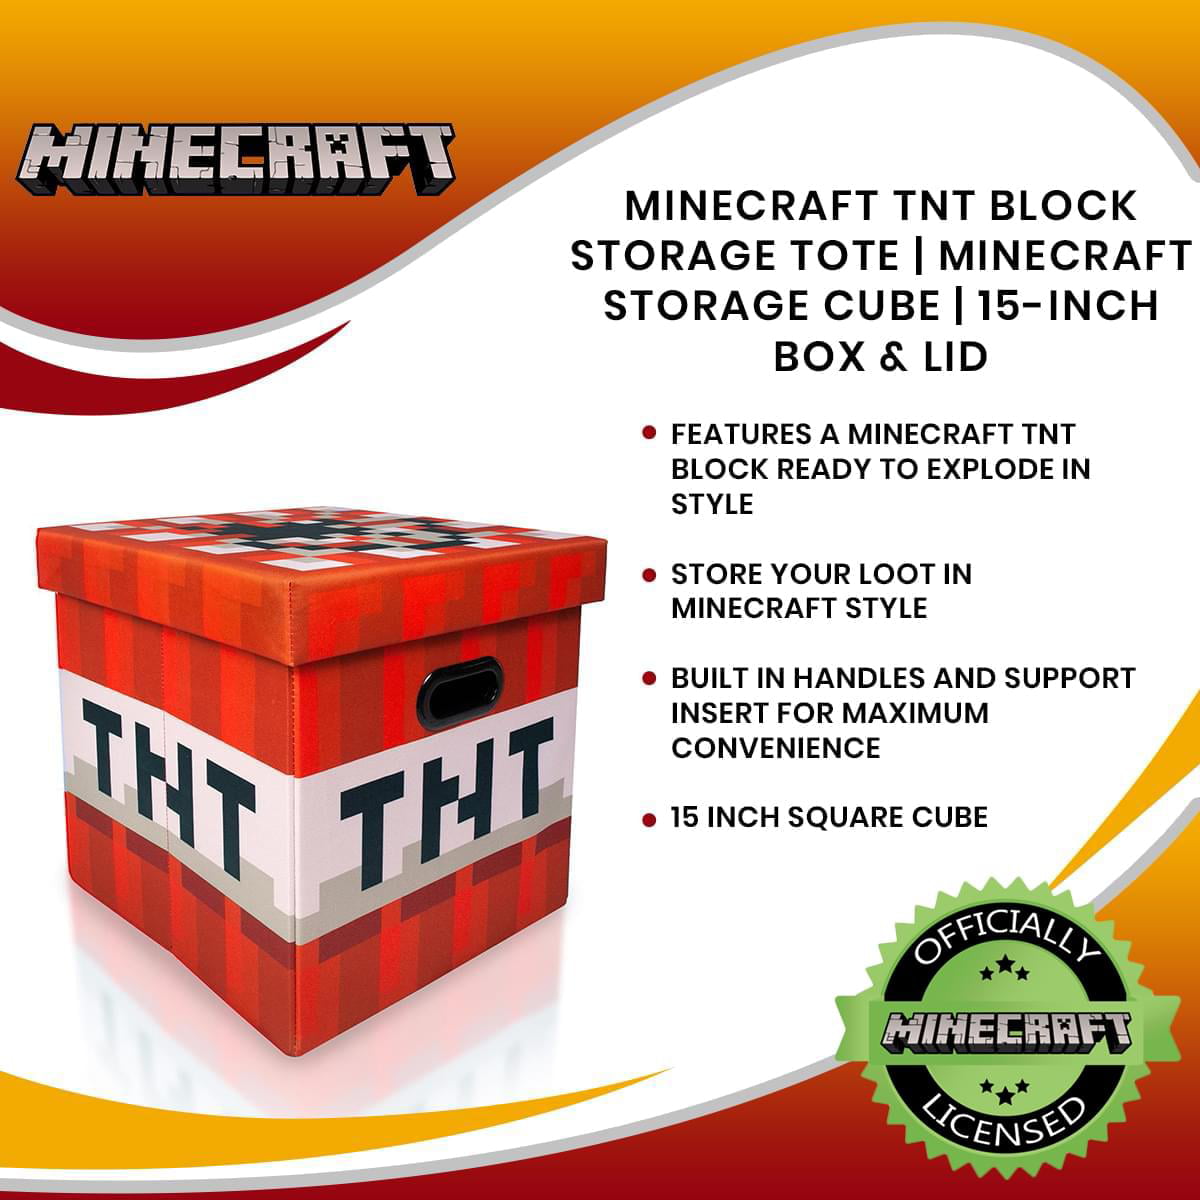 Minecraft Storage Cube TNT Block from Minecraft Cubbies Storage Cubes 15-Inch Square Bin with Lid Minecraft TNT Block Storage Cube Organizer Organization Cubes